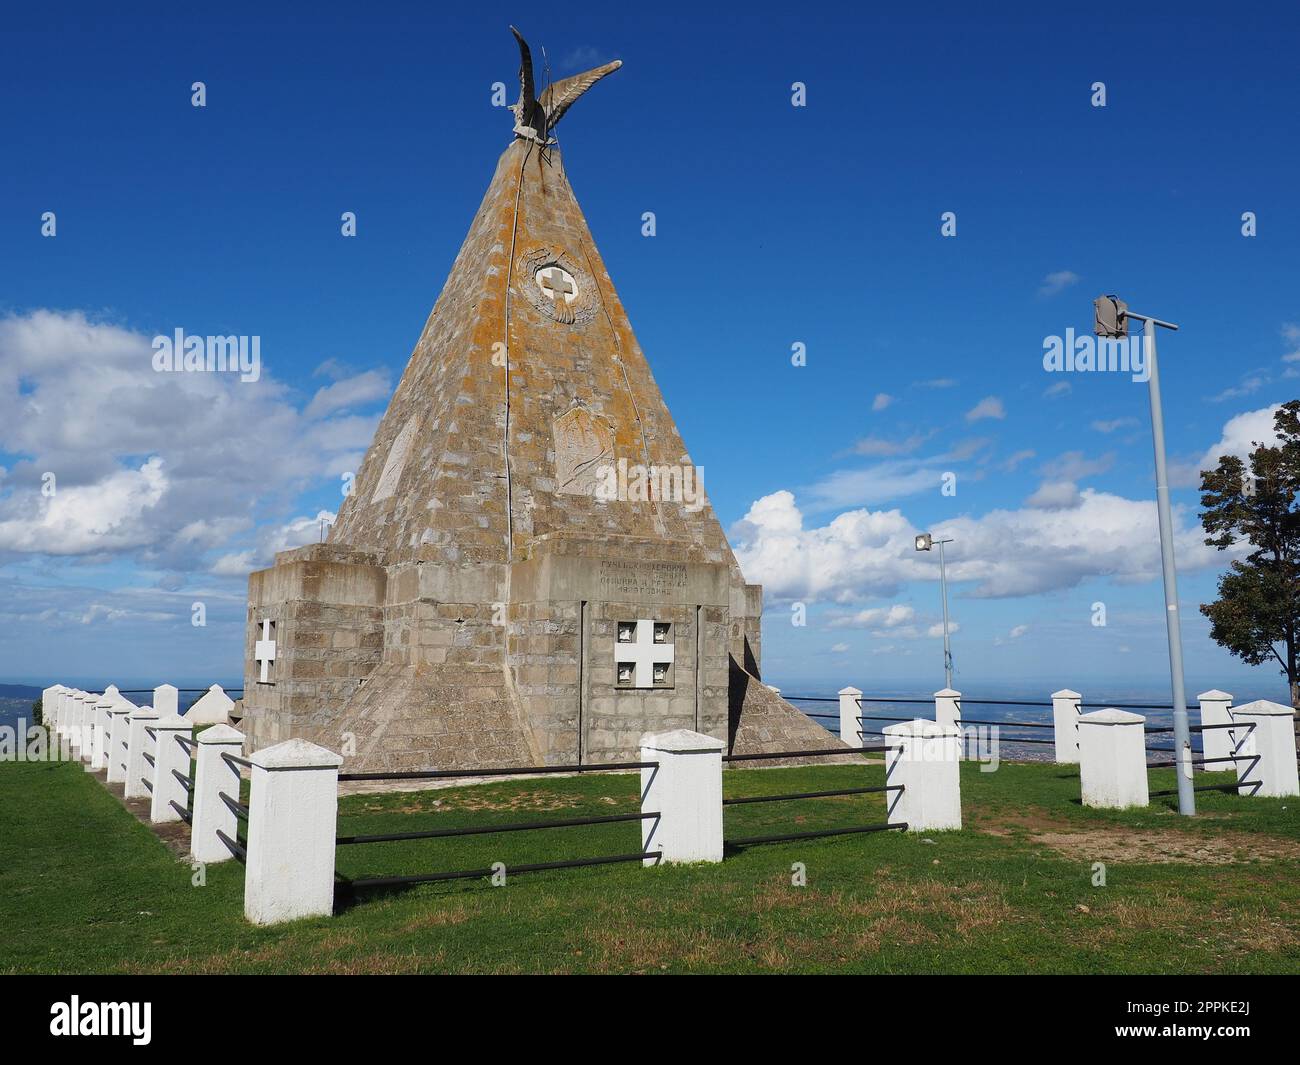 Banja Koviljaca, Loznica, Serbia 10.01.2022 Crni vrh is the highest peak of Guchevo mountain. A monument and ossuary to Serbian and Austro-Hungarian soldiers died at Gucevo during the First World War. Stock Photo